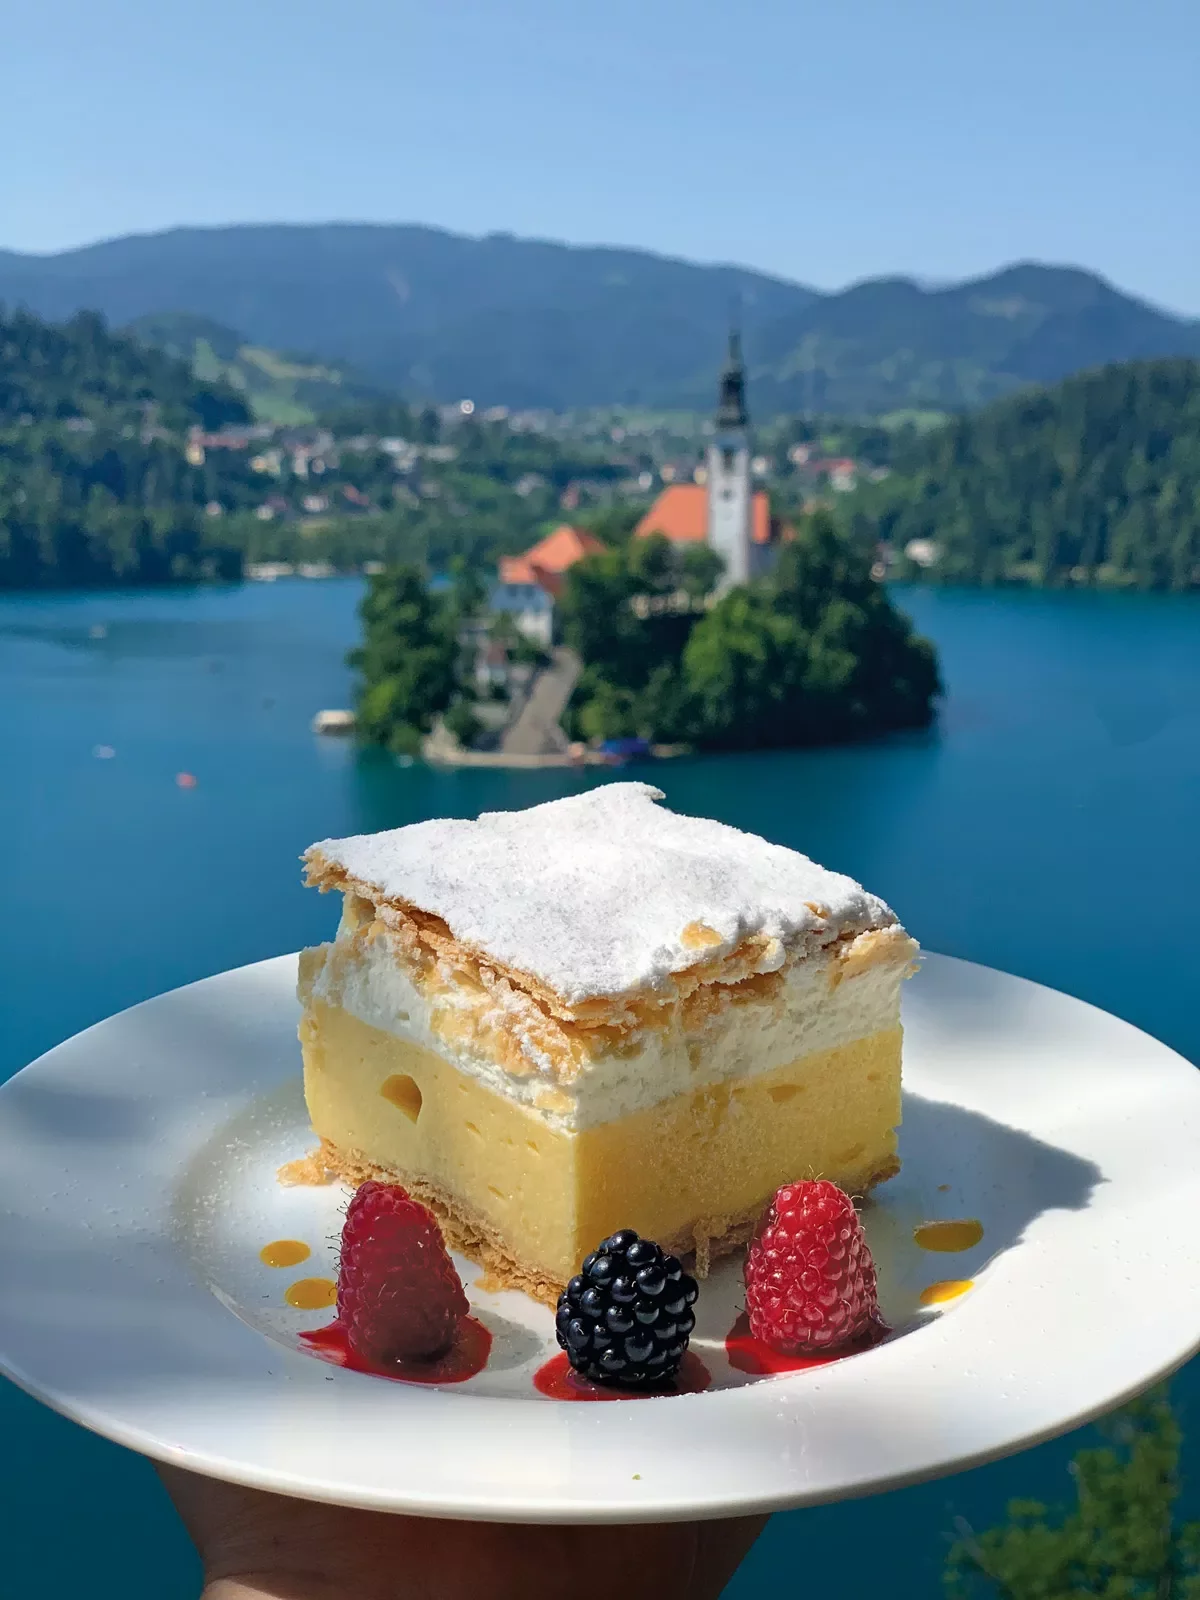 Cake and berries on a plate with a view